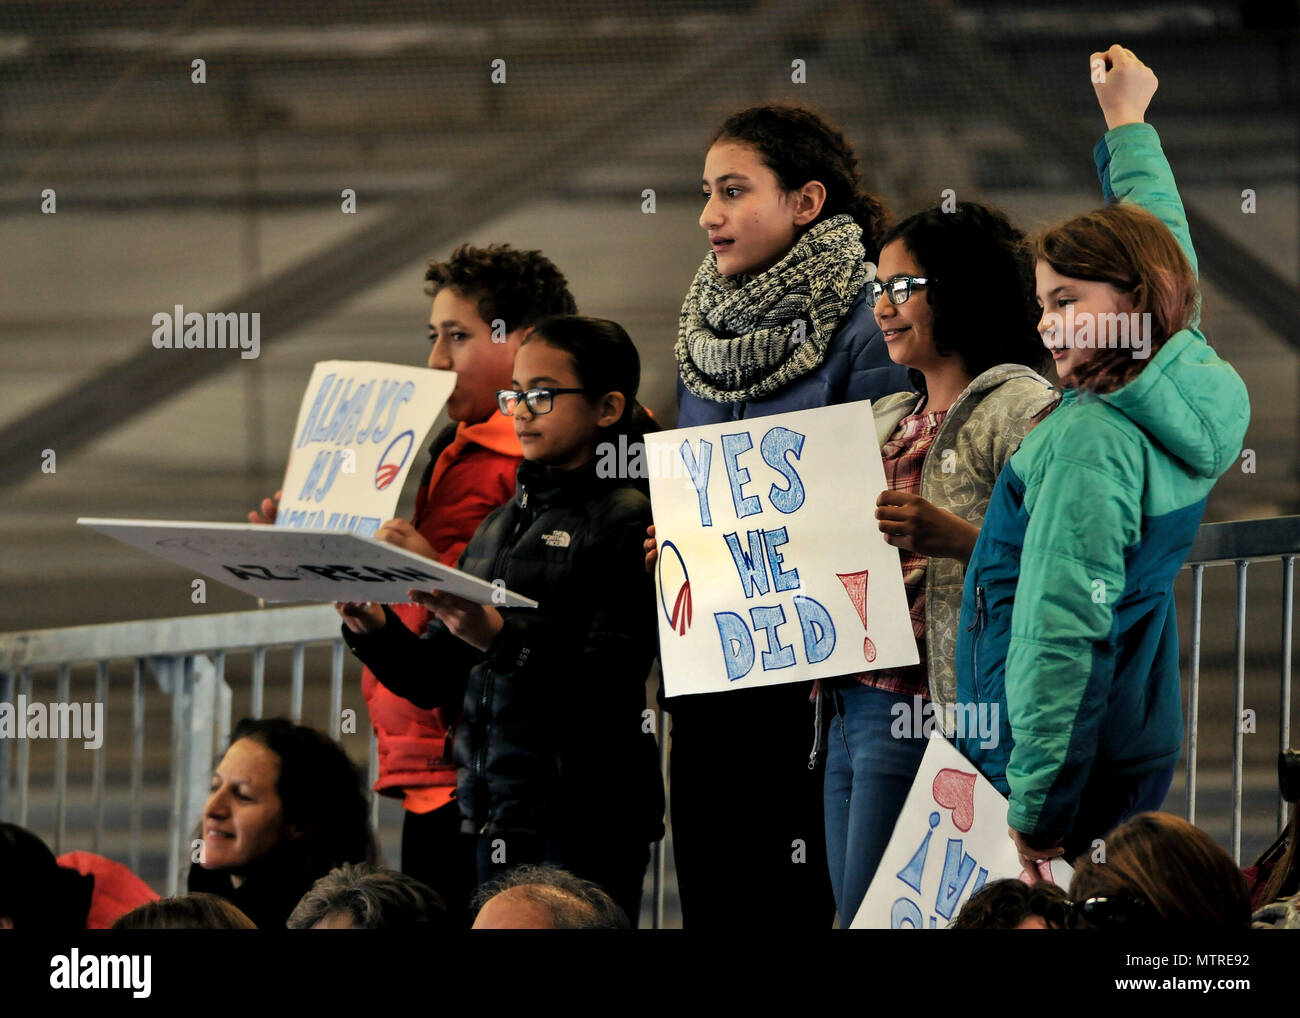 Children hold signs in support of former President Barack Obama during his farewell speech at Joint Base Andrews, Md. Jan. 20, 2017. After his speech Obama and his wife Michelle took time to shake hands and exchange hugs with members of the crowd before boarding a plane to depart. (U.S. Air Force photo by Staff Sgt. Stephanie Morris) Stock Photo